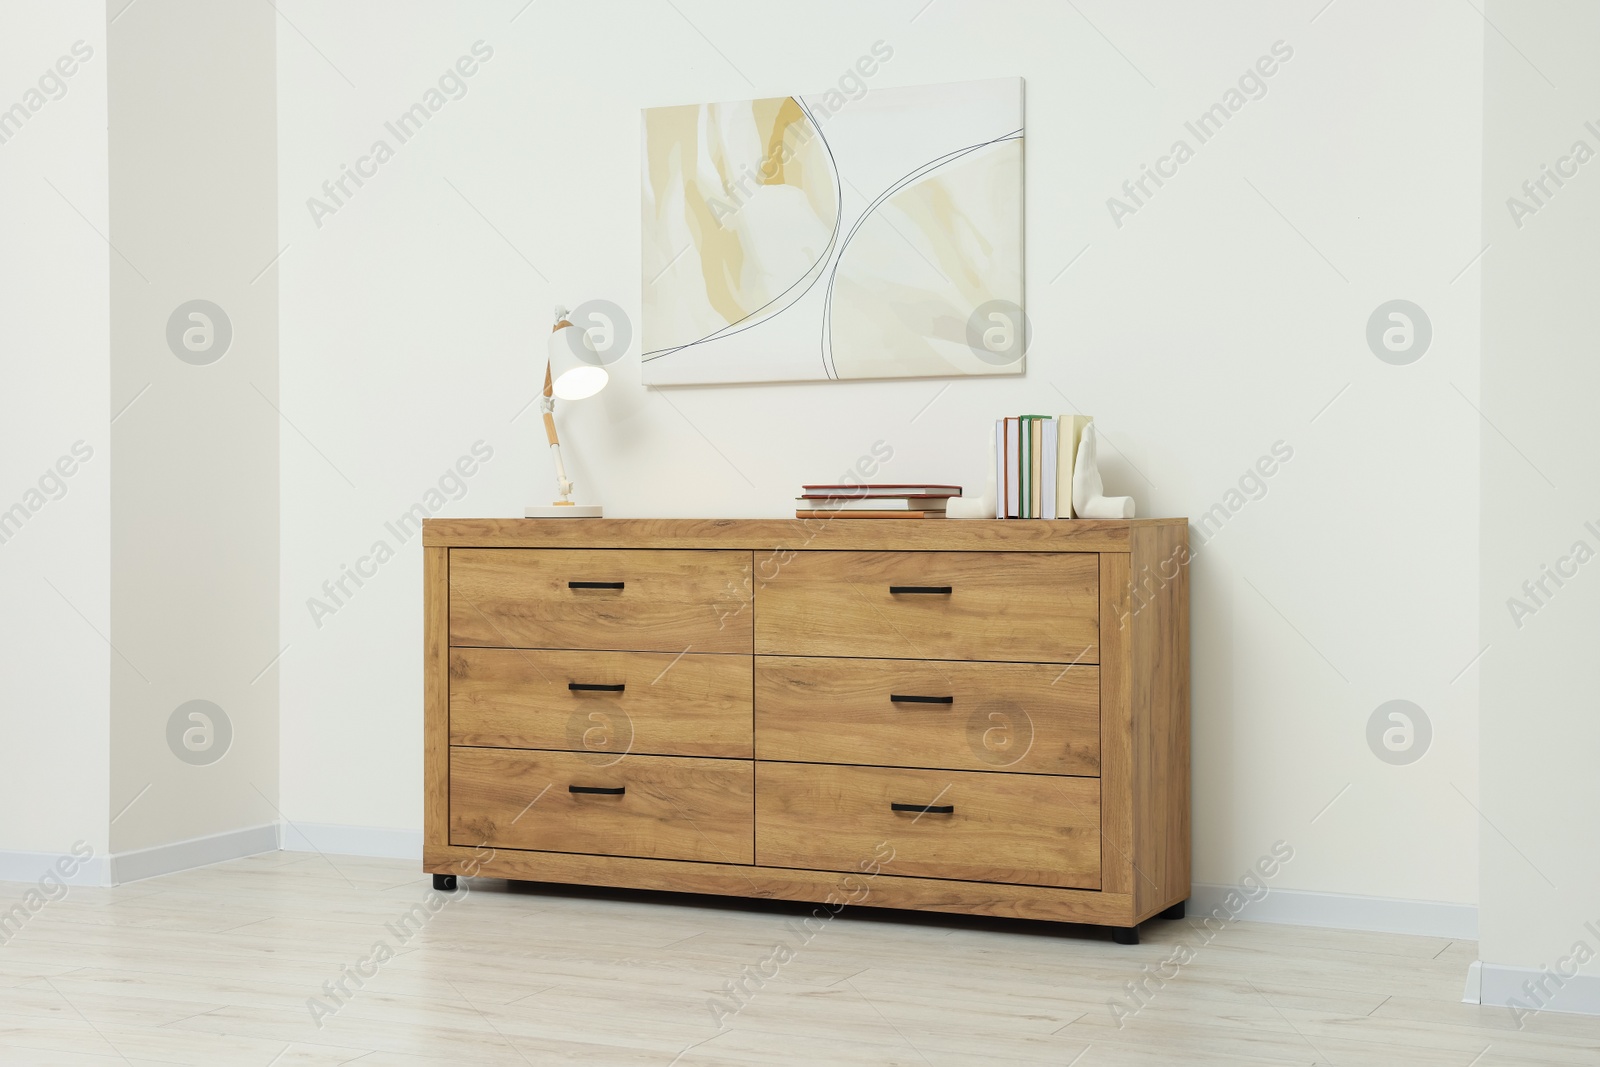 Photo of Wooden chest of drawers, lamp and beautiful picture on white wall indoors. Interior design